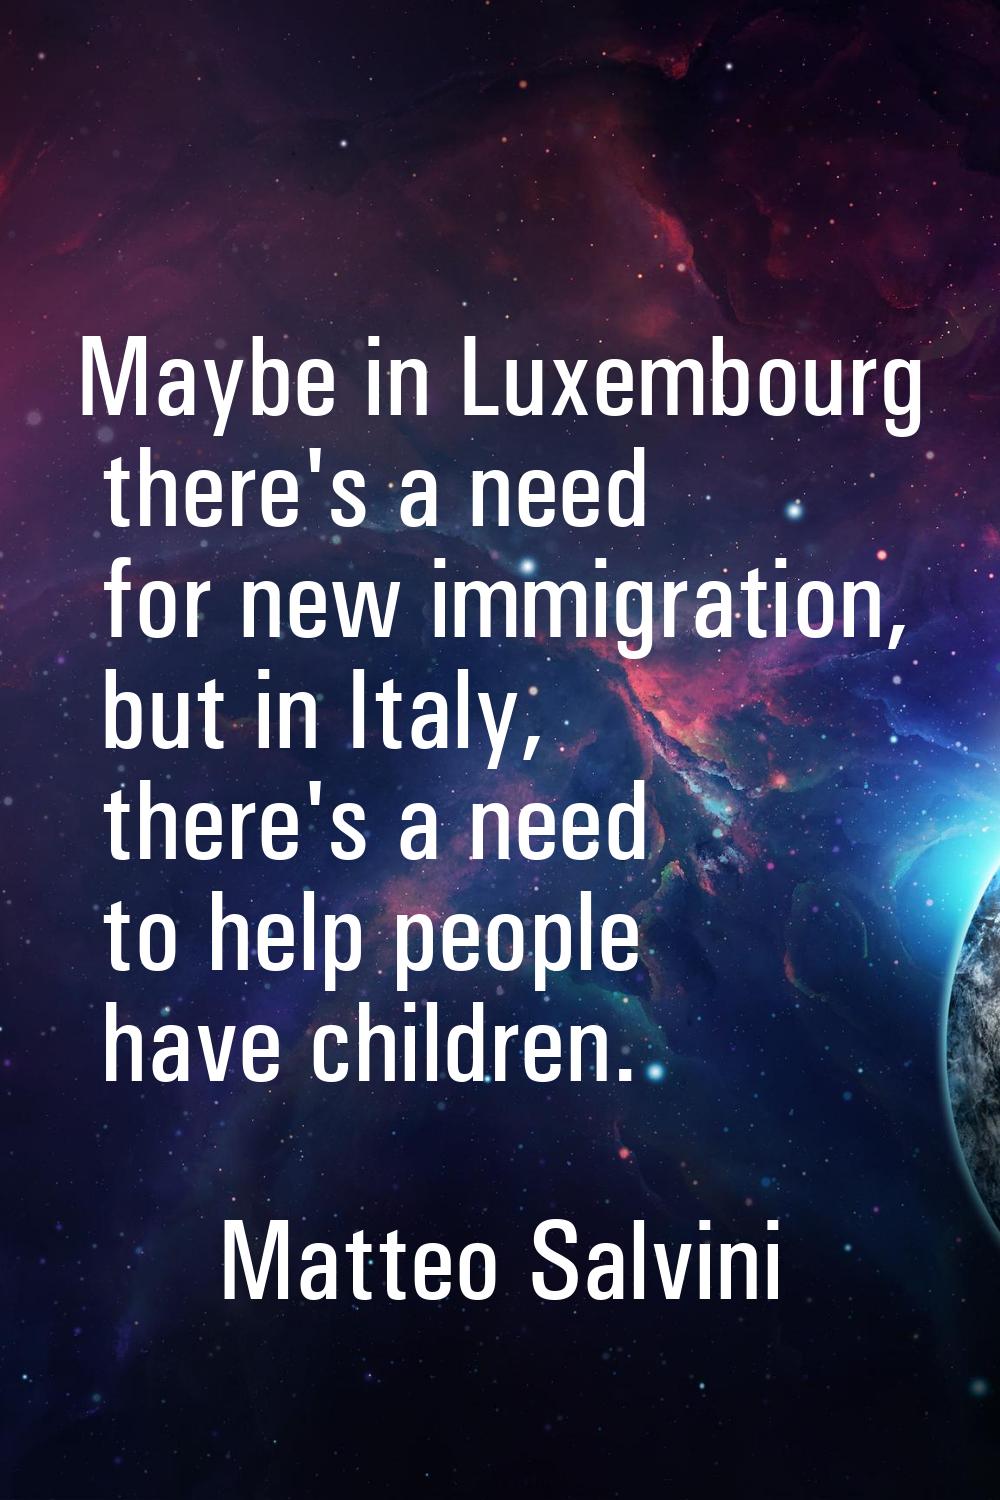 Maybe in Luxembourg there's a need for new immigration, but in Italy, there's a need to help people